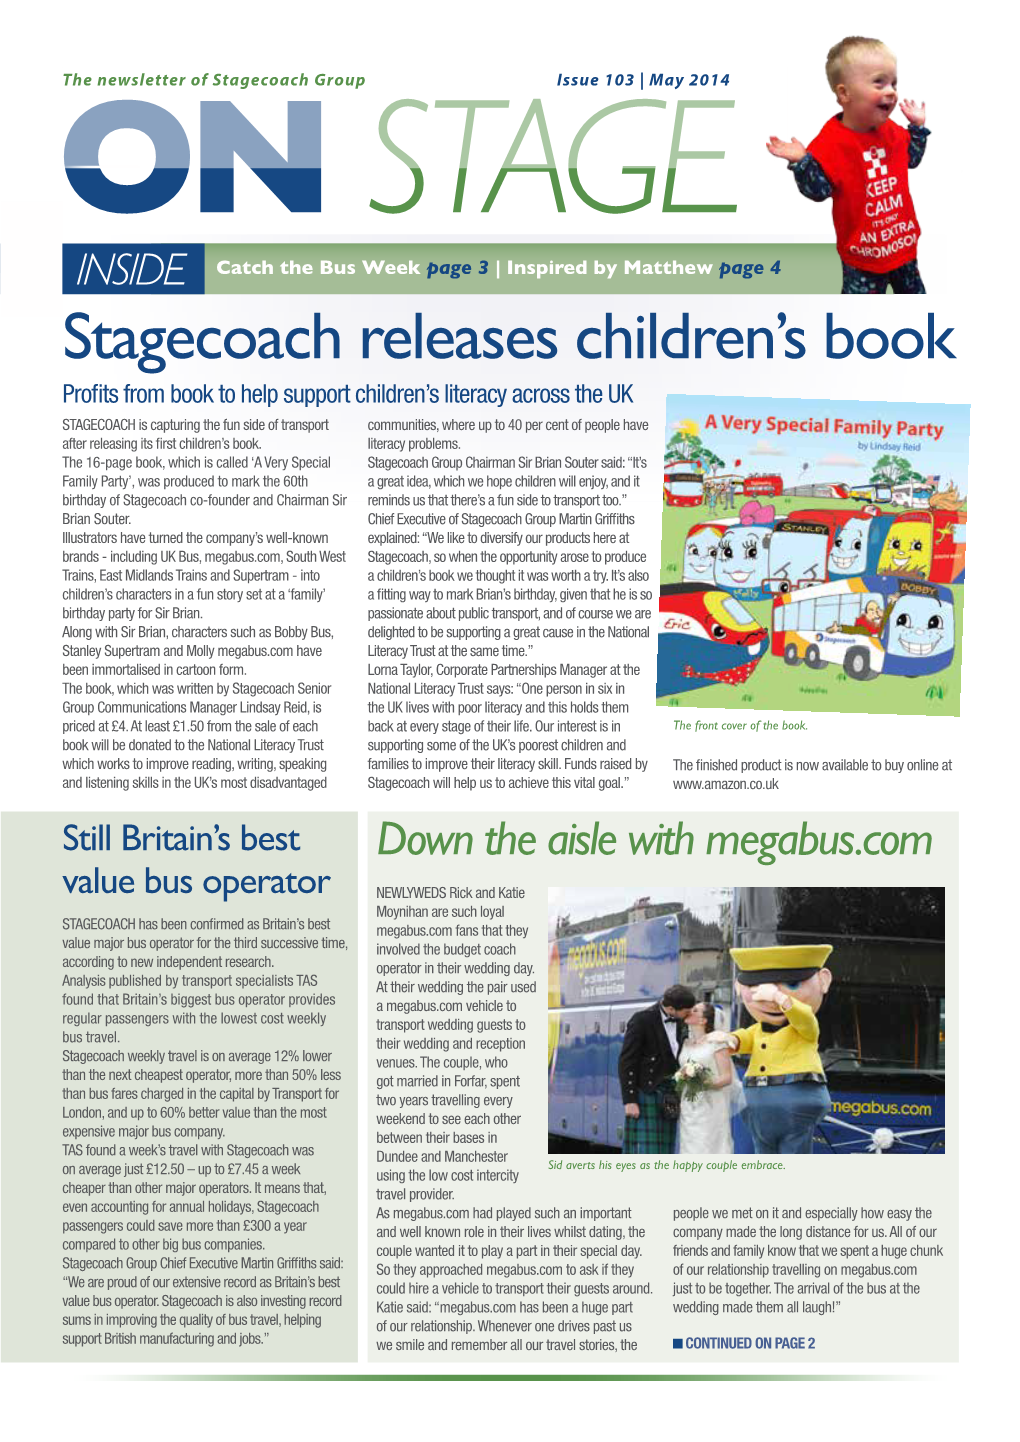 Stagecoach Releases Children's Book